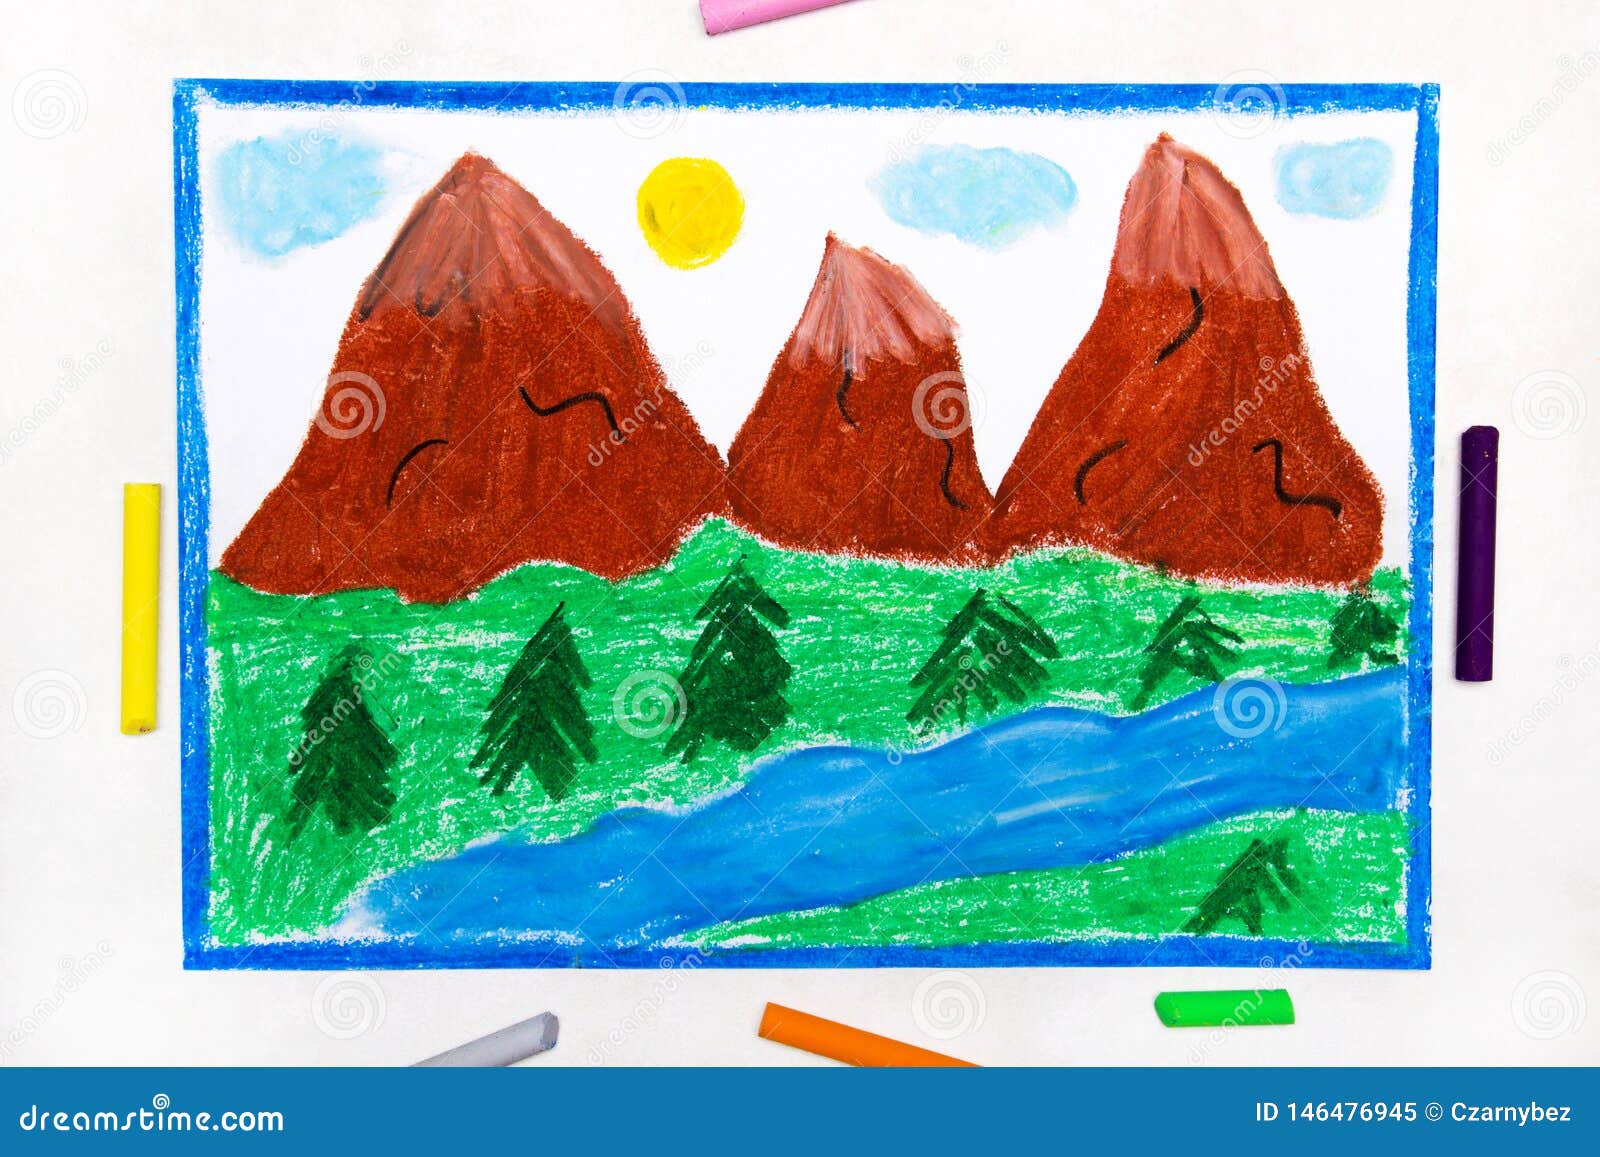 How To Paint A Beautiful Landscape With Watercolor For Kids